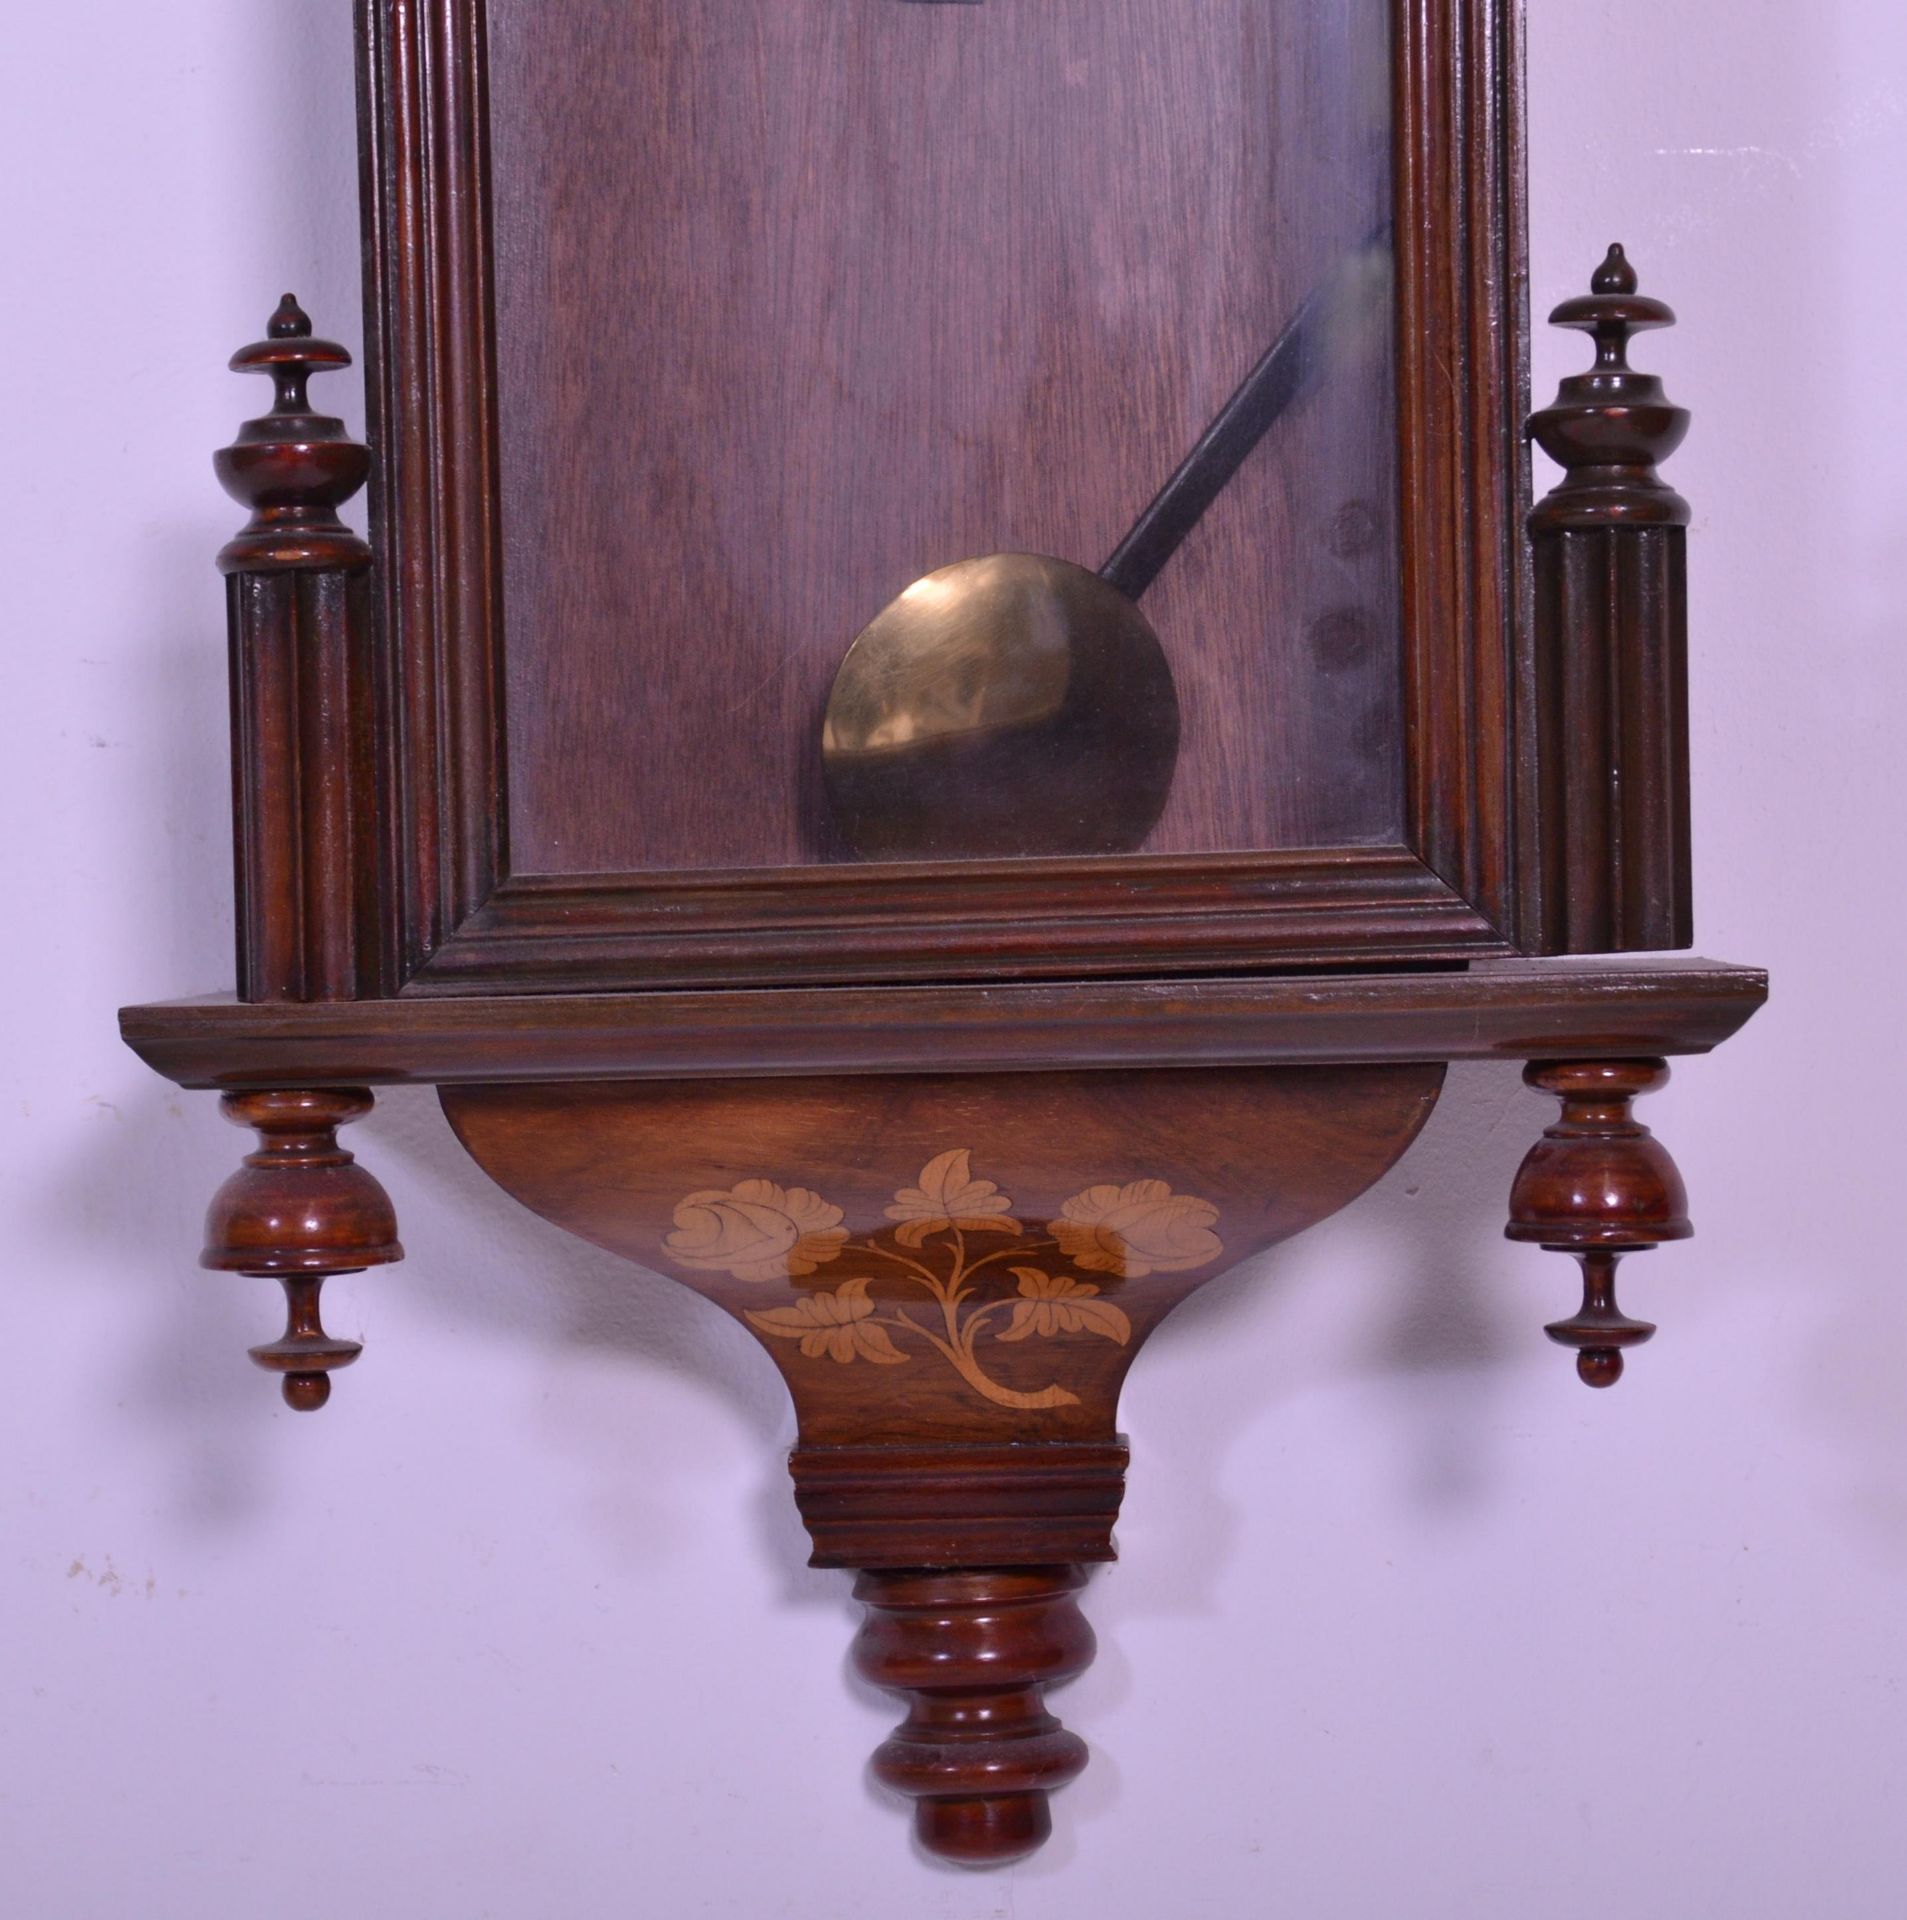 An early 20th century mahogany cased Vienna regulator wall clock complete with pendulum and - Image 4 of 5